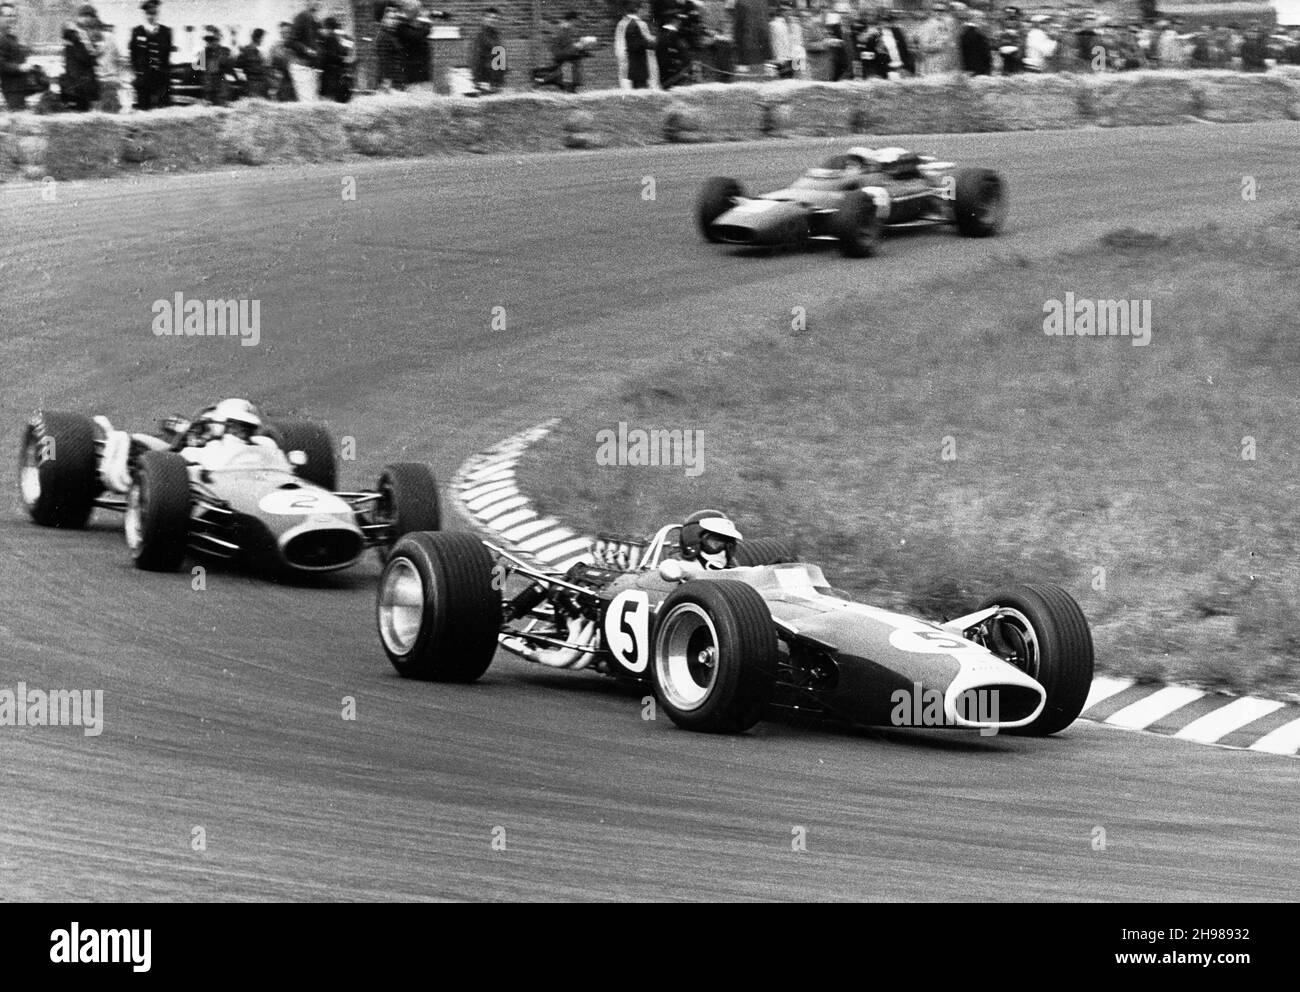 Jim Clark driving his Lotus 49 R3 DFV to victory at the Dutch Grand Prix, Zandvoort, Netherlands, 1967. Immediately behind Clark is Denny Hulme's Brabham-Repco which finished third. Stock Photo